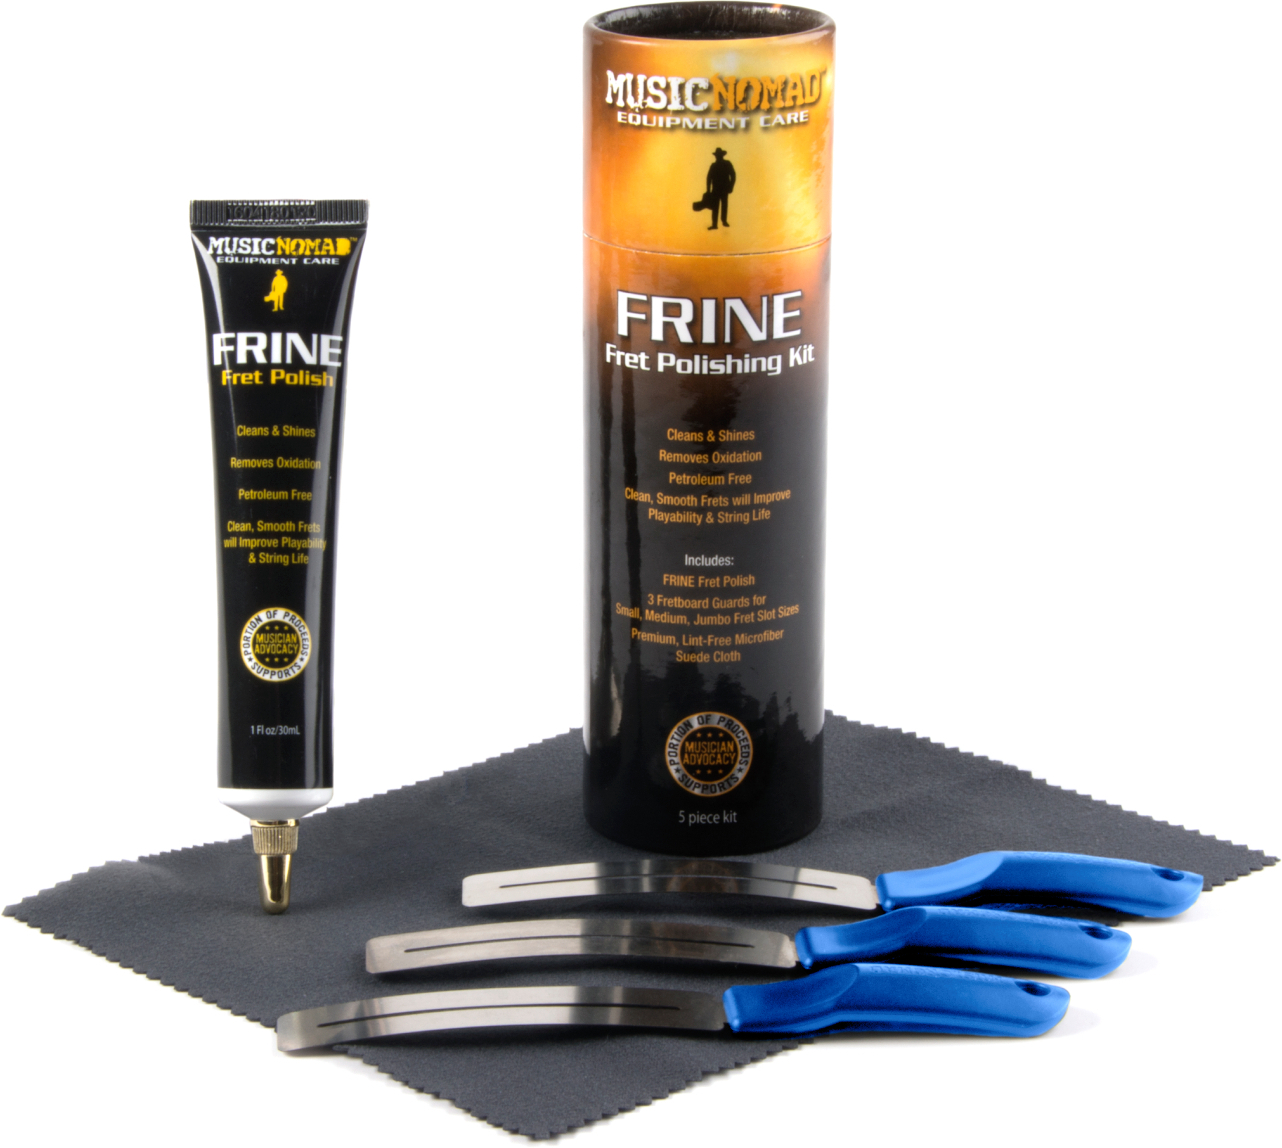 Musicnomad Frine Fret Polishing Kit(mn 124) - Care & Cleaning - Main picture